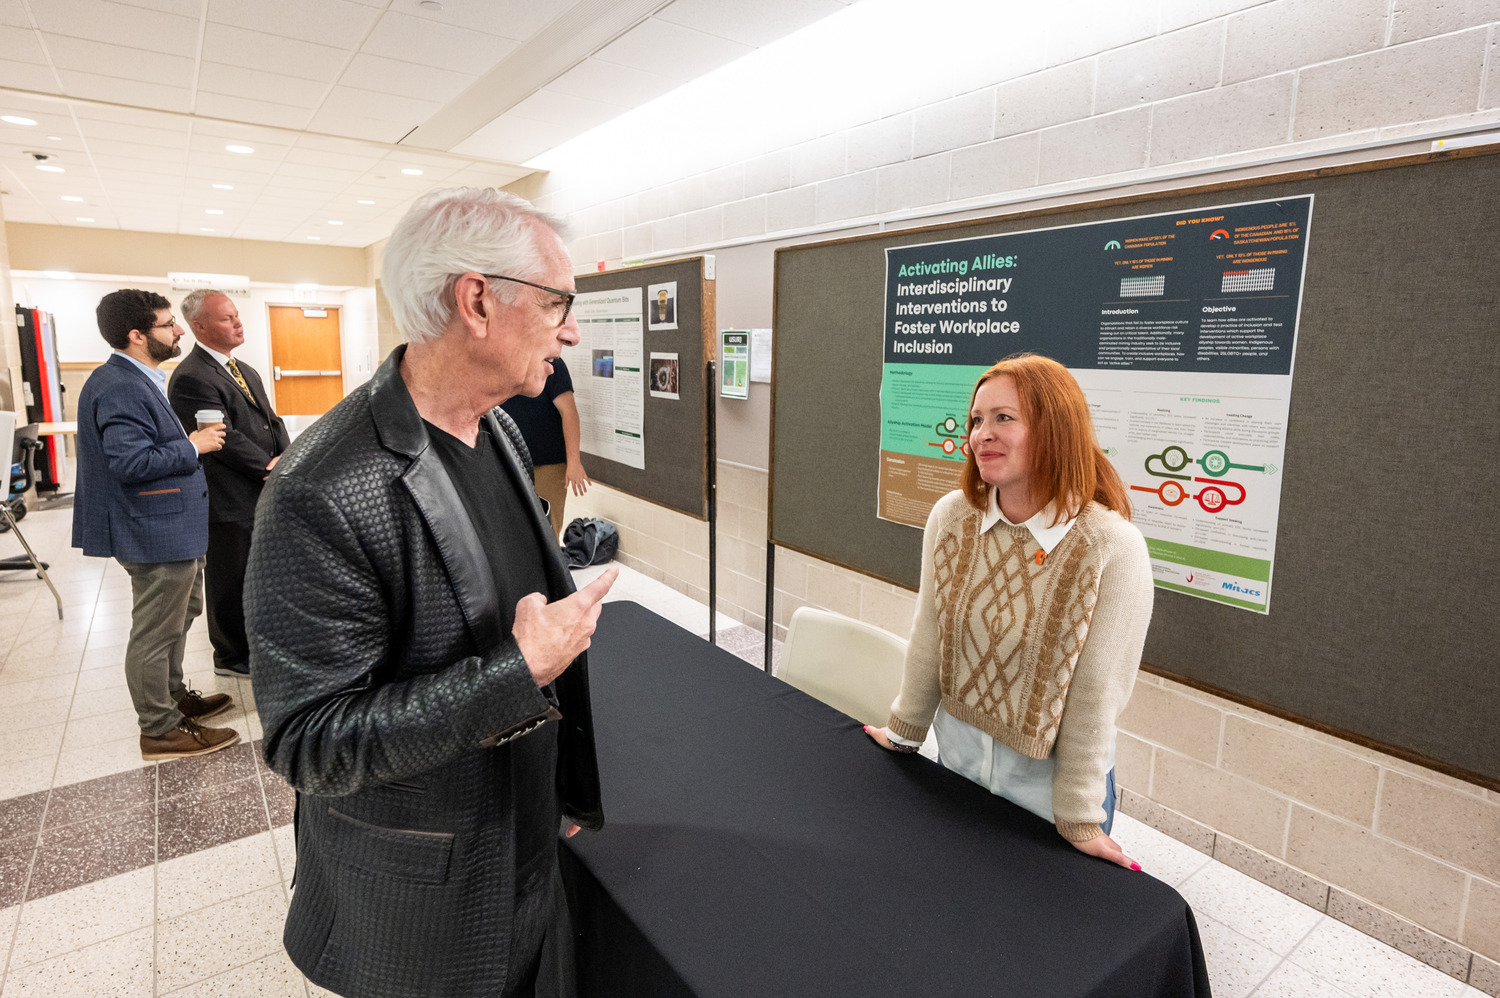 Pictured: USask President Peter Stoicheff learns more about PhD candidate Jocelyn Peltier-Huntley's research Photo credits: Matt Smith